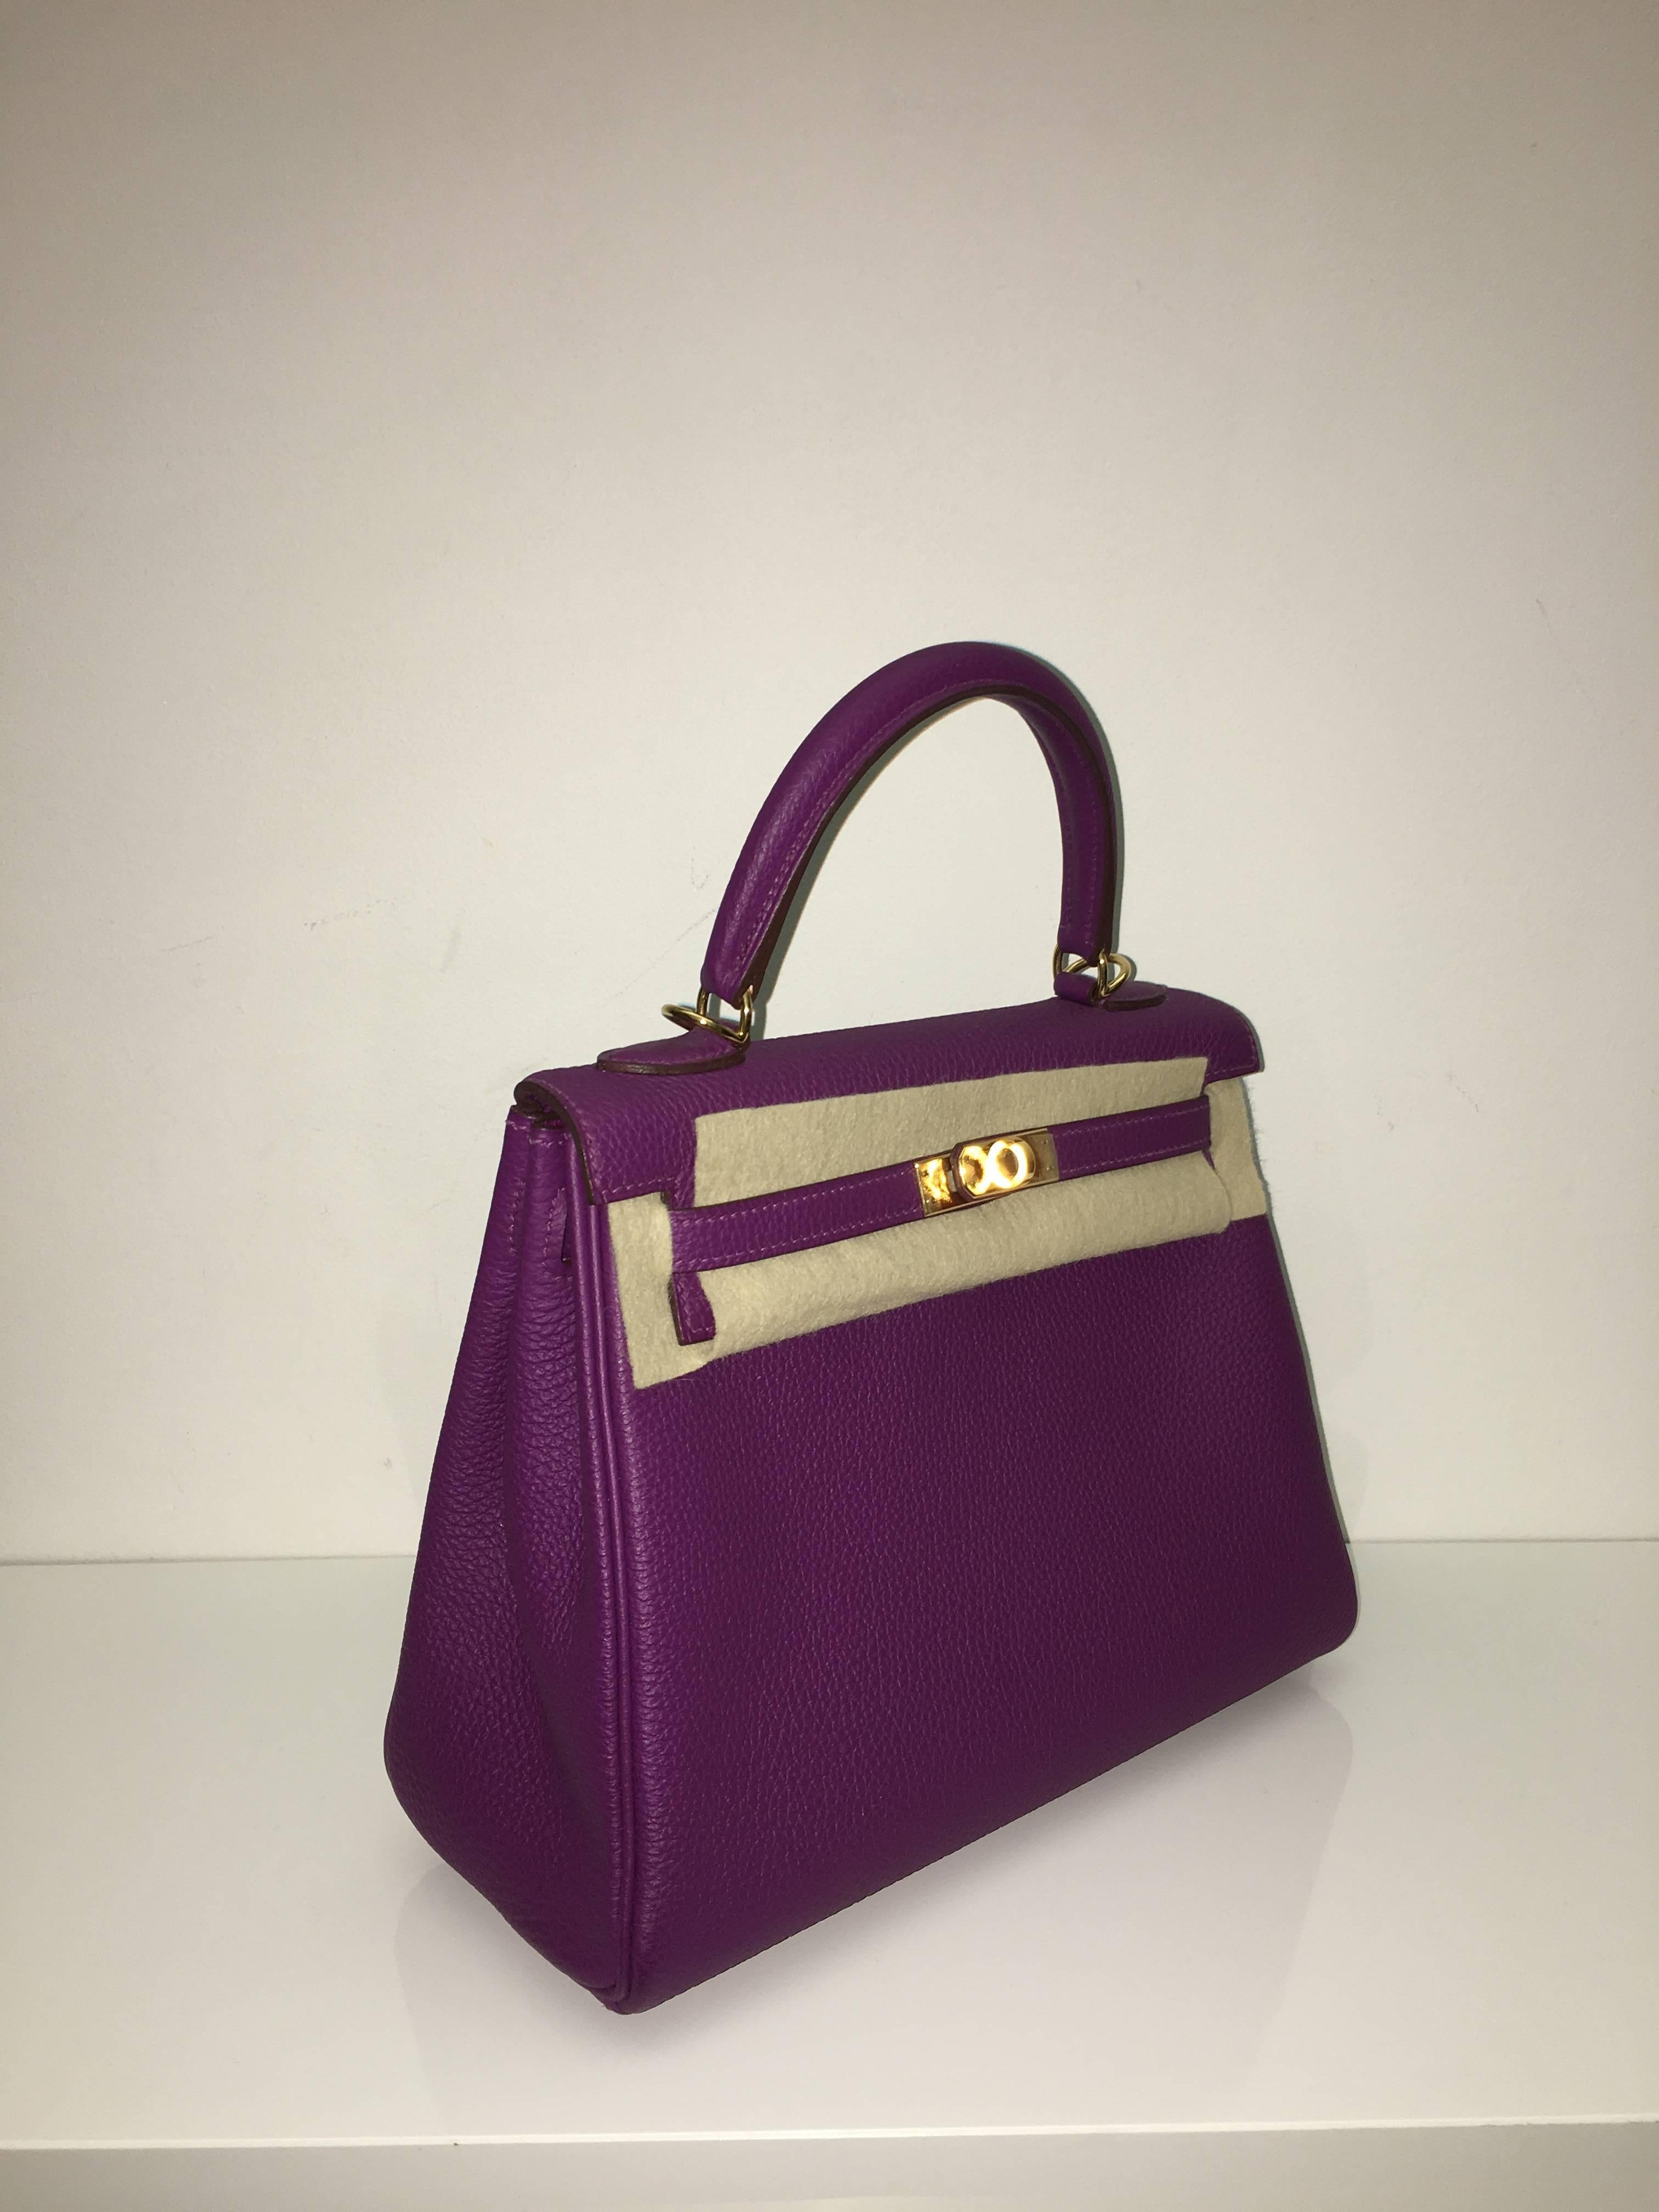 Hermes 
Kelly Size 25
Togo Leather 
Colour Anemone
Gold Hardware 
store fresh, comes with receipt and full set (dust bag, box...) 
Hydeparkfashion specializes in sourcing and delivering authentic luxury handbags, mainly Hermes, to client